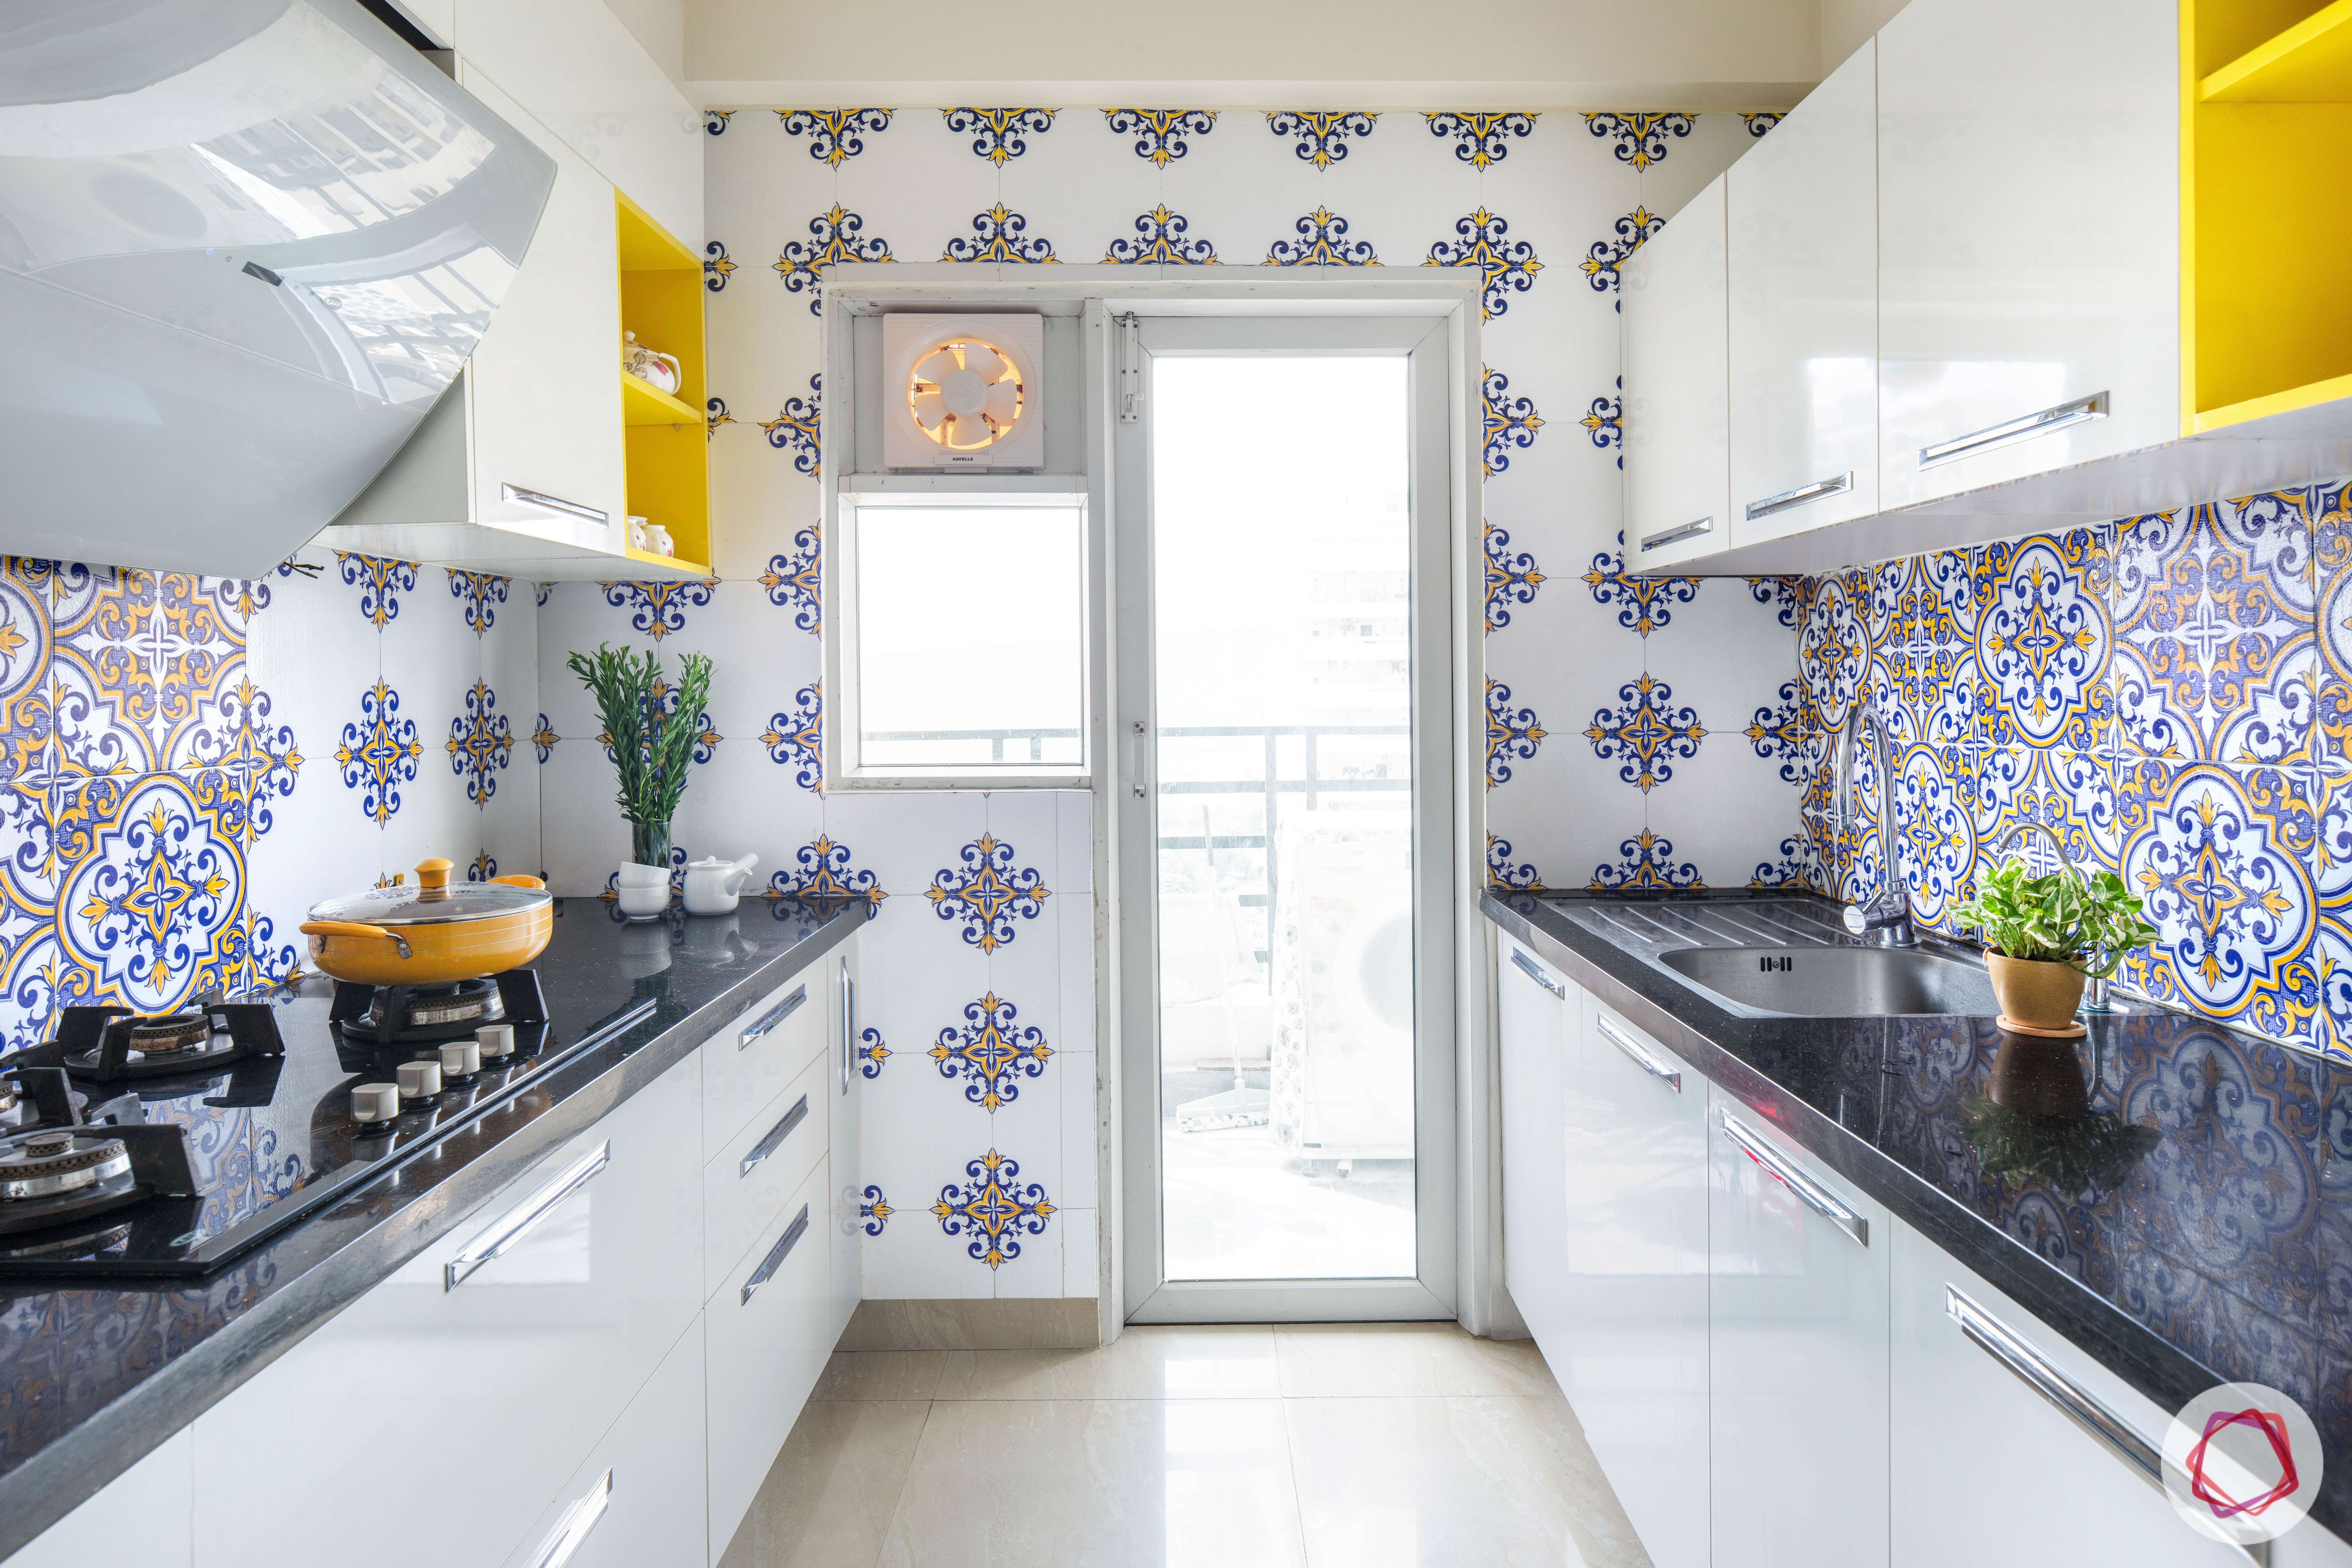 18 Splendid Wall Tiles Design That Can Give a New Look to Your Kitchen